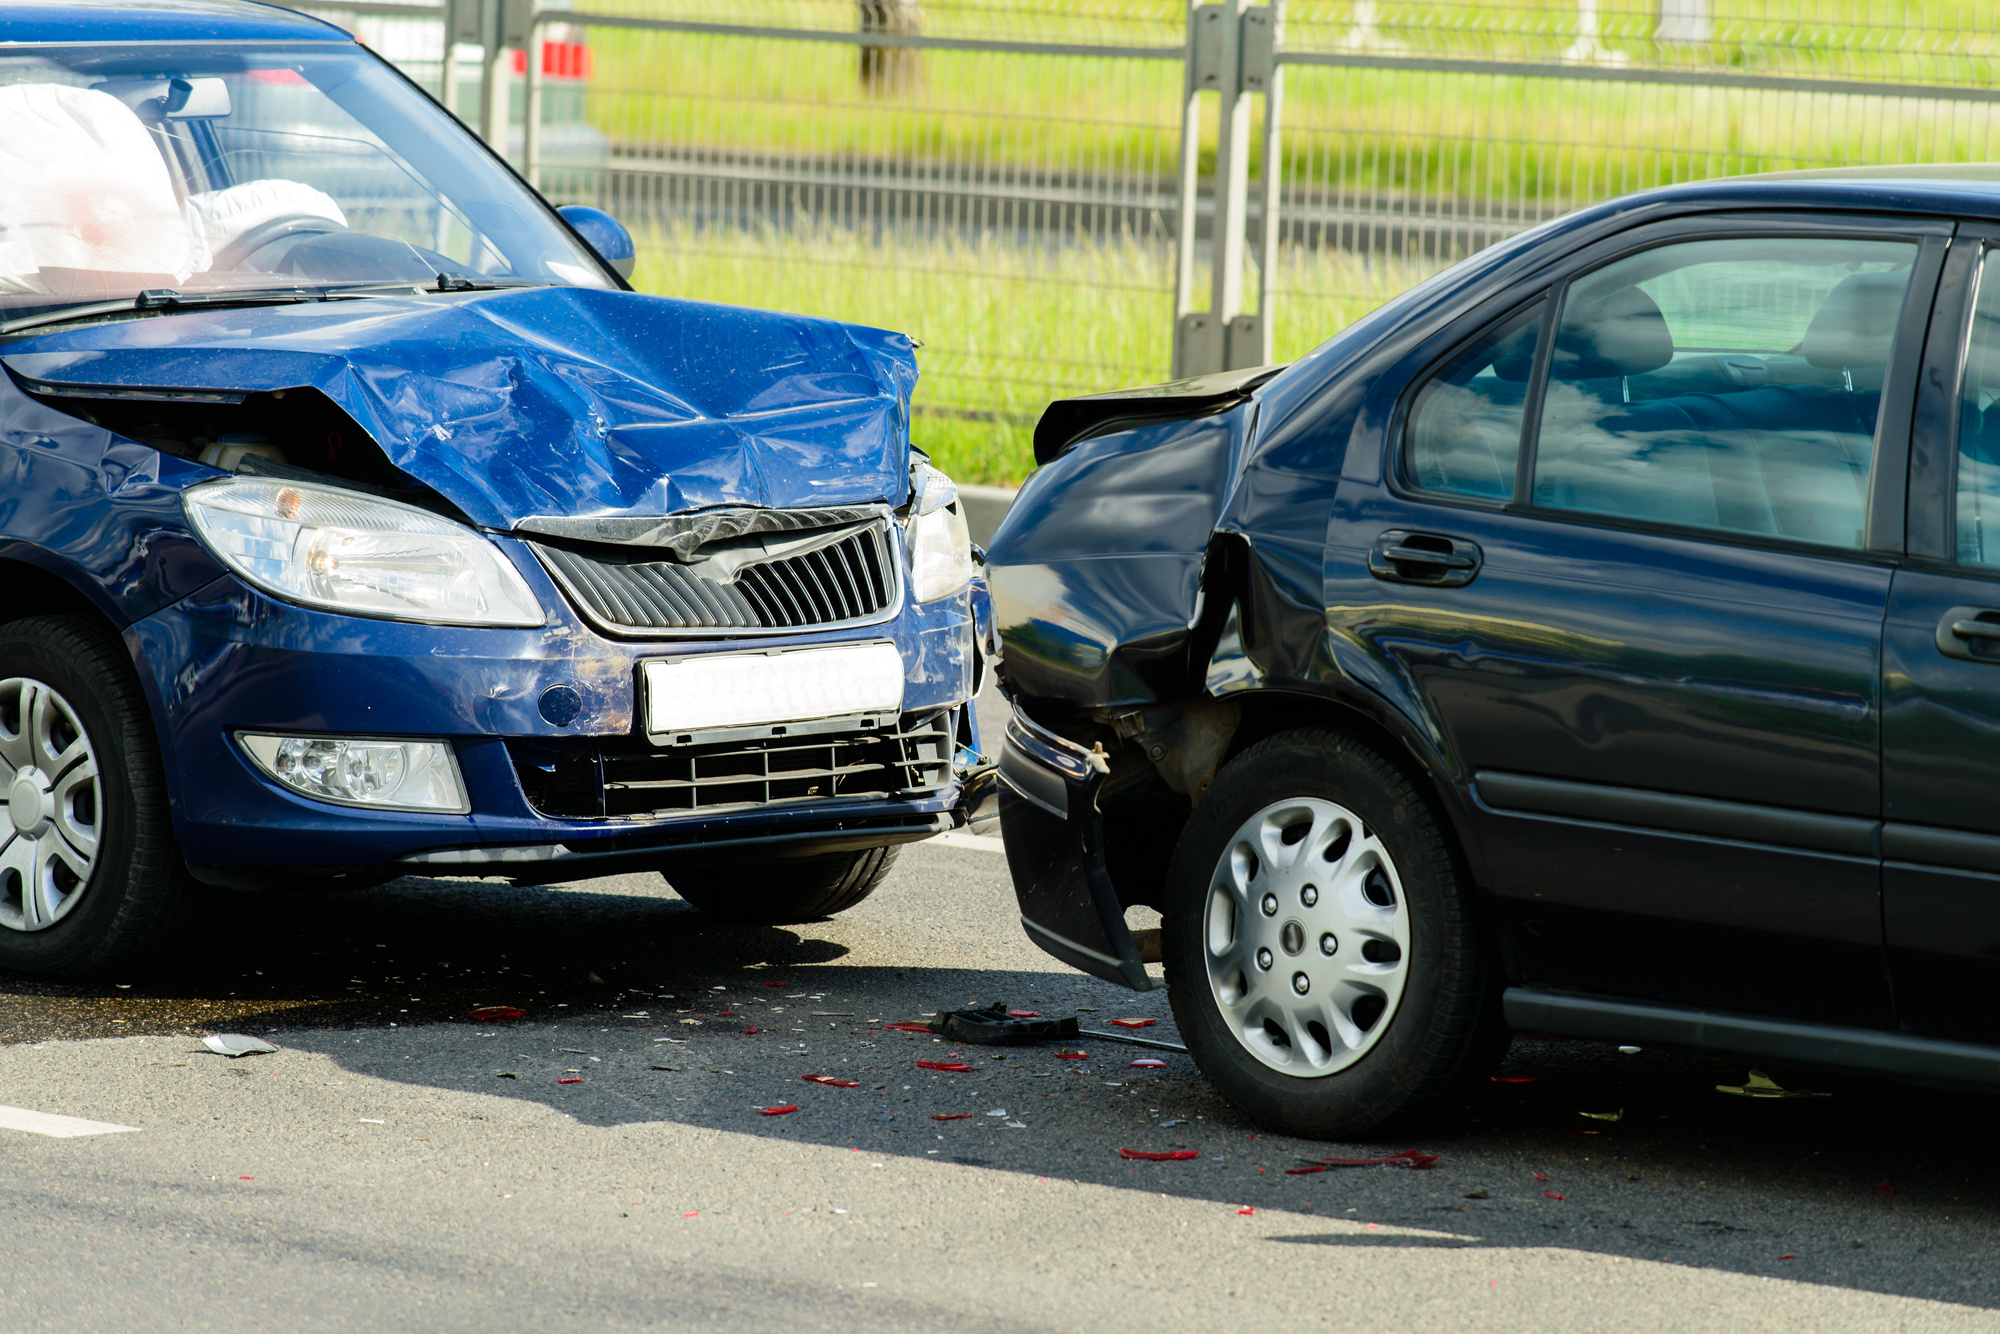 7 Tips for Getting an Advance on an Auto Accident Settlement